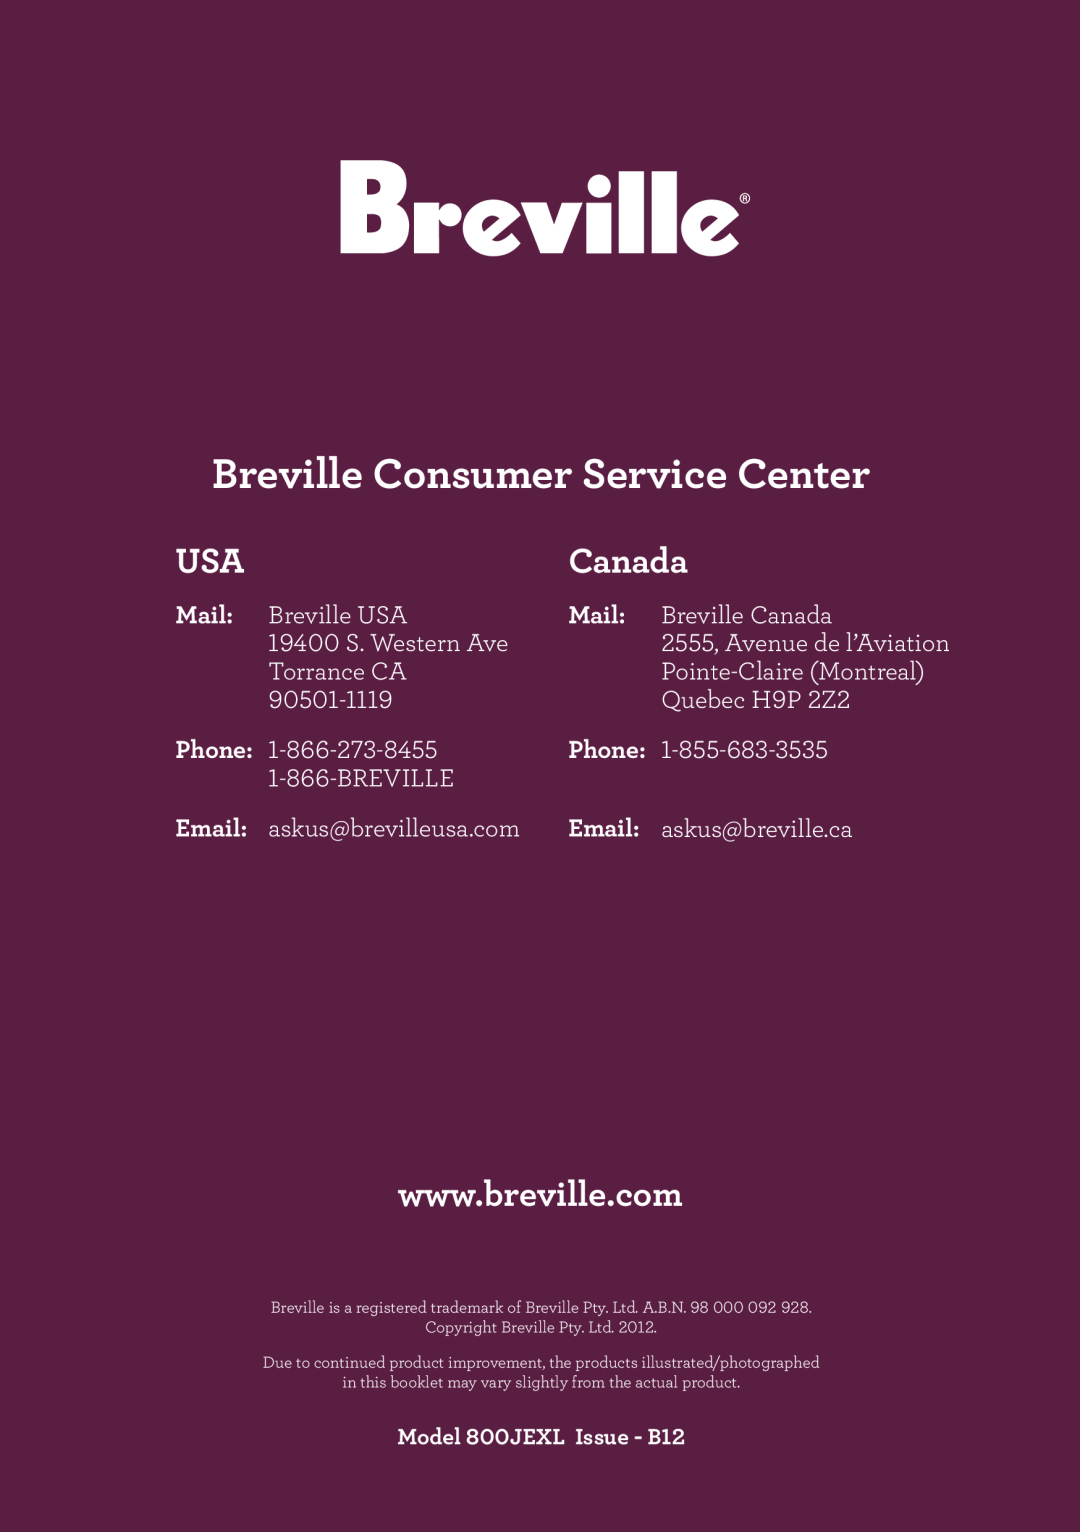 Breville 800JEXL manual Mail, Phone, Email, Breville Consumer Service Center, Canada 